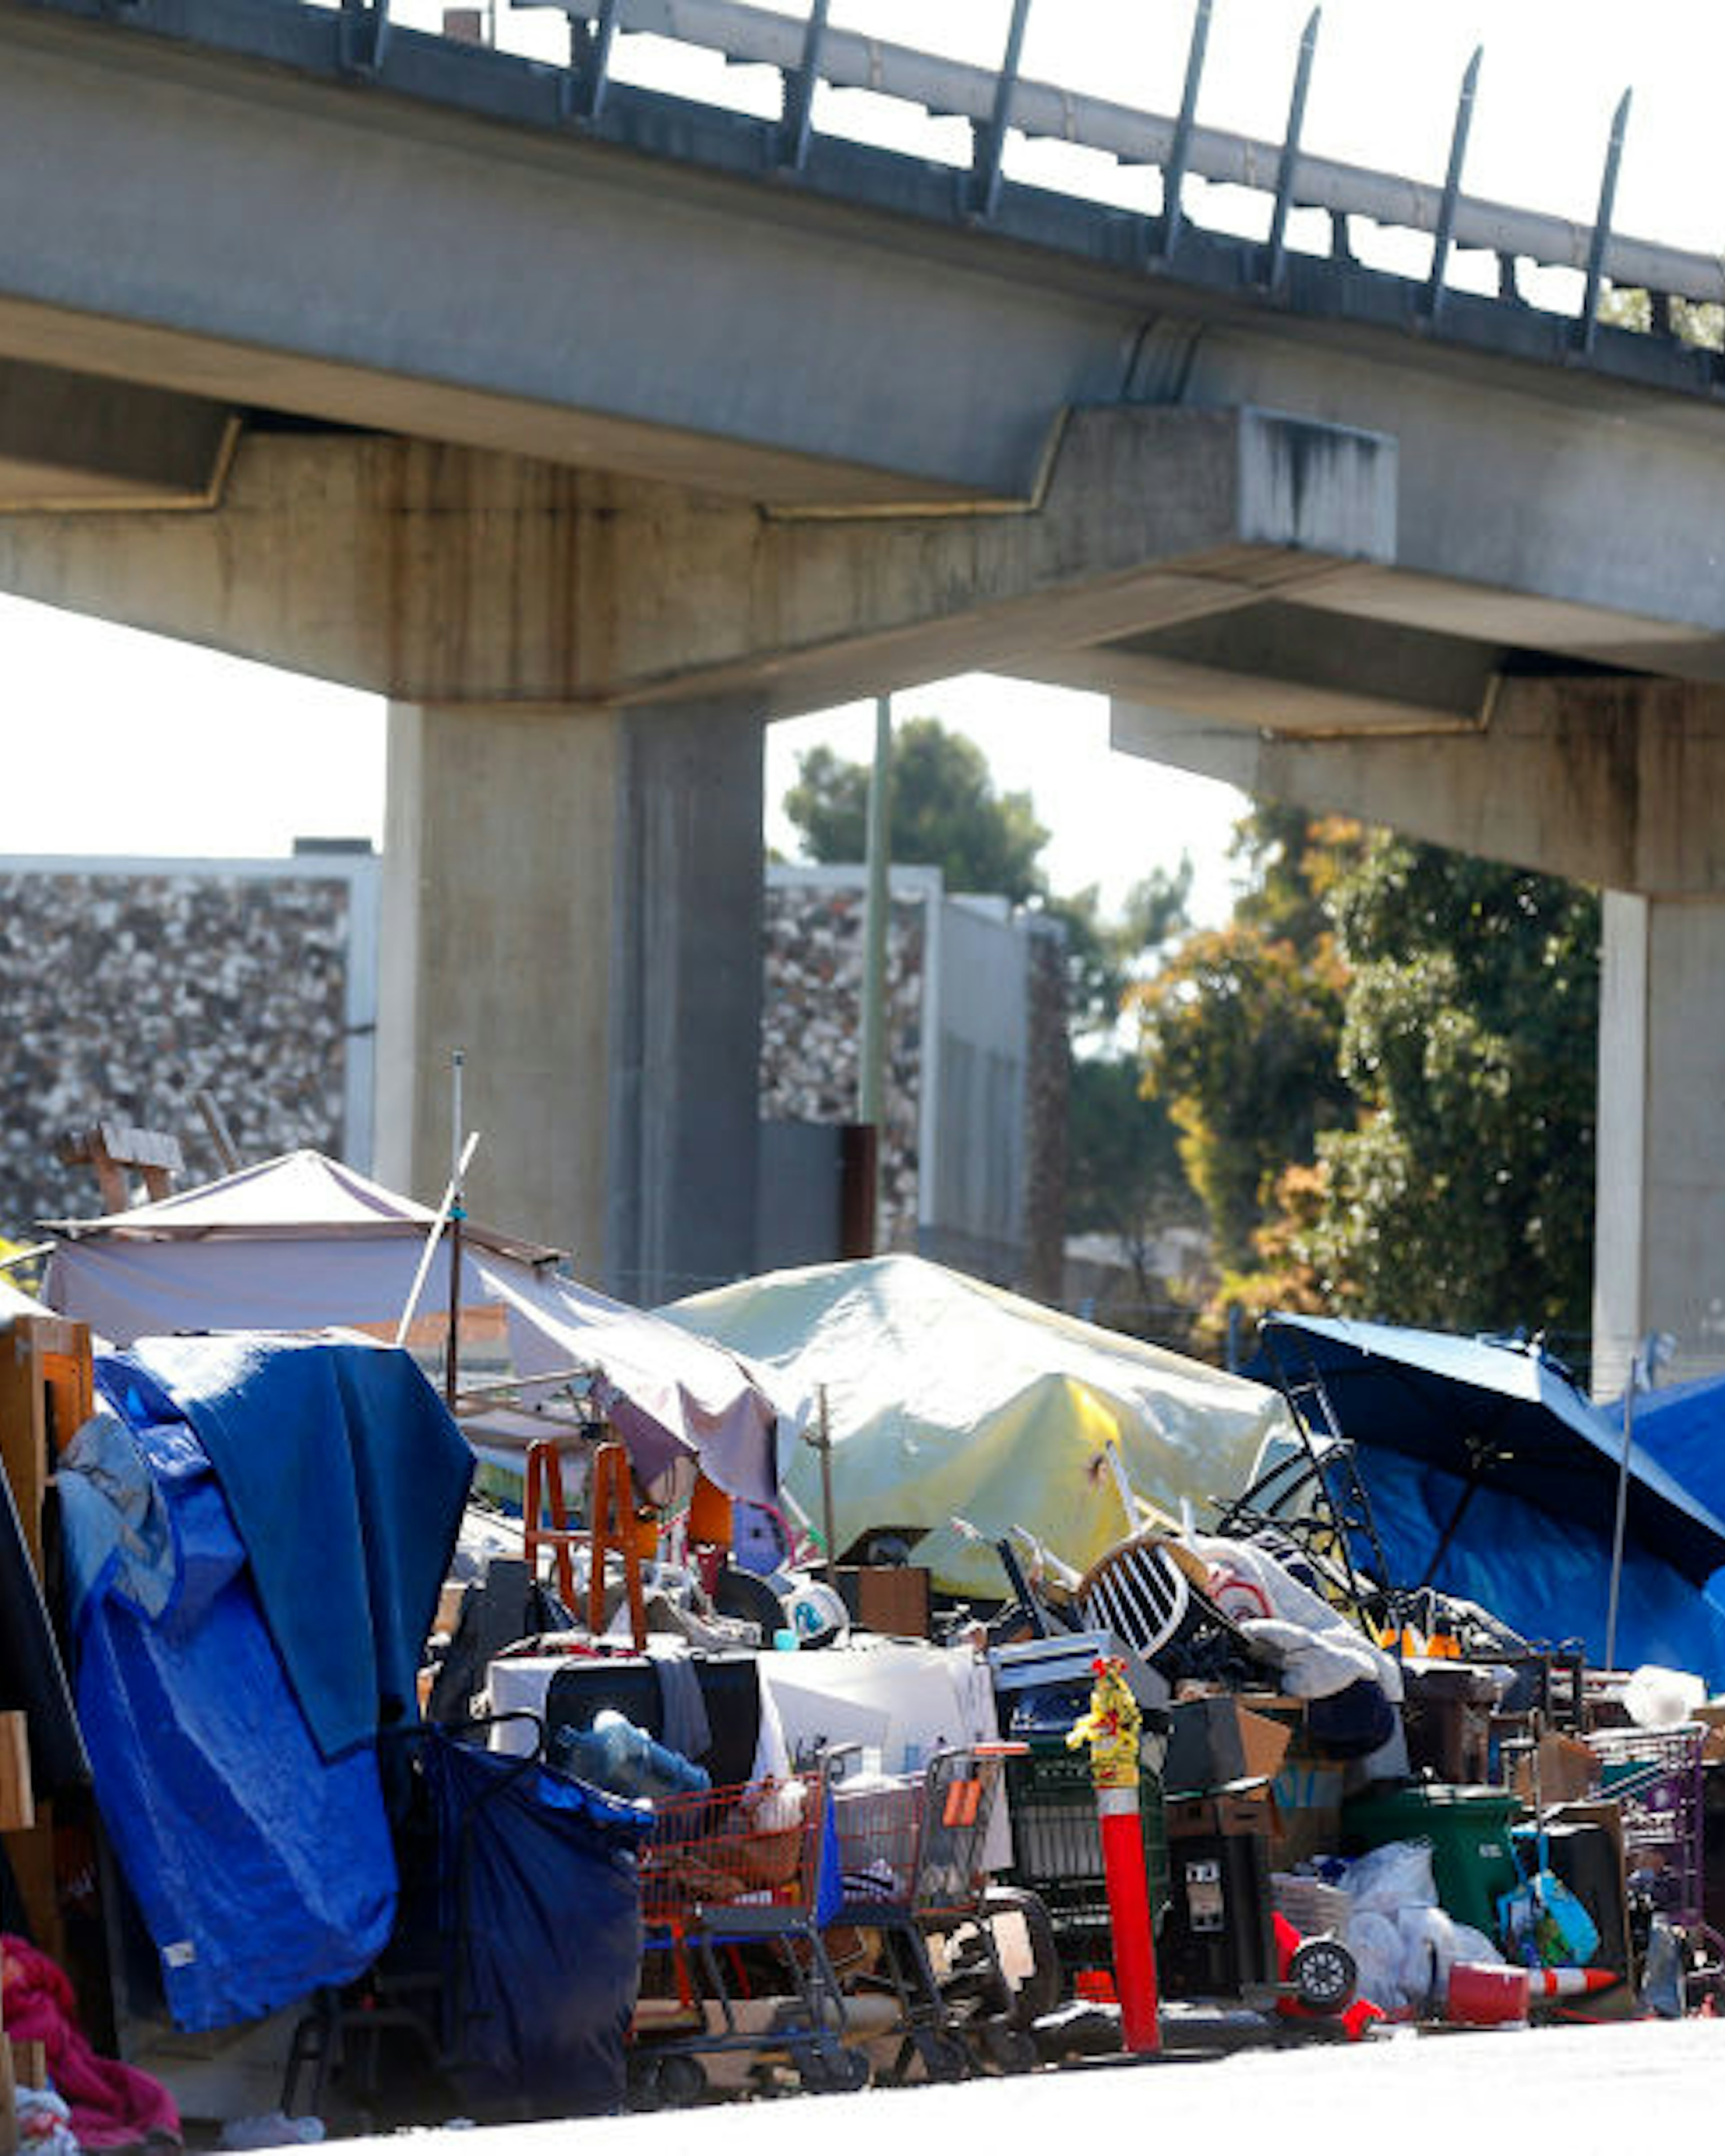 A homeless camp at Market Street and 5th Street is photographed on Thursday, May 18, 2017, in Oakland, Calif. (Aric Crabb/Bay Area News Group) (camp 20) (Photo by MediaNews Group/Bay Area News via Getty Images)